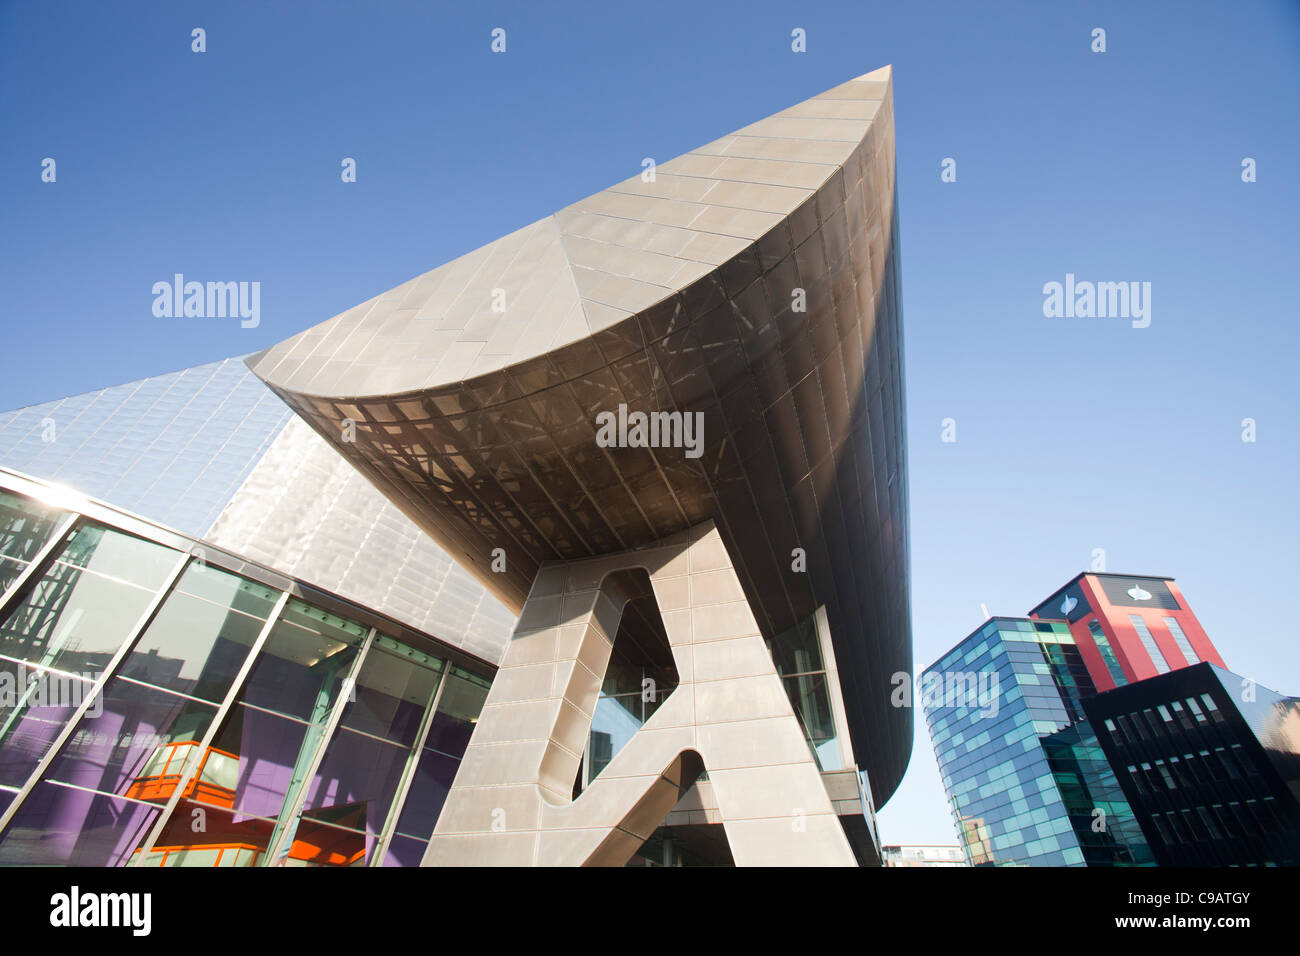 The Lowry Theatre at Salford Quays, Manchester, UK. Stock Photo